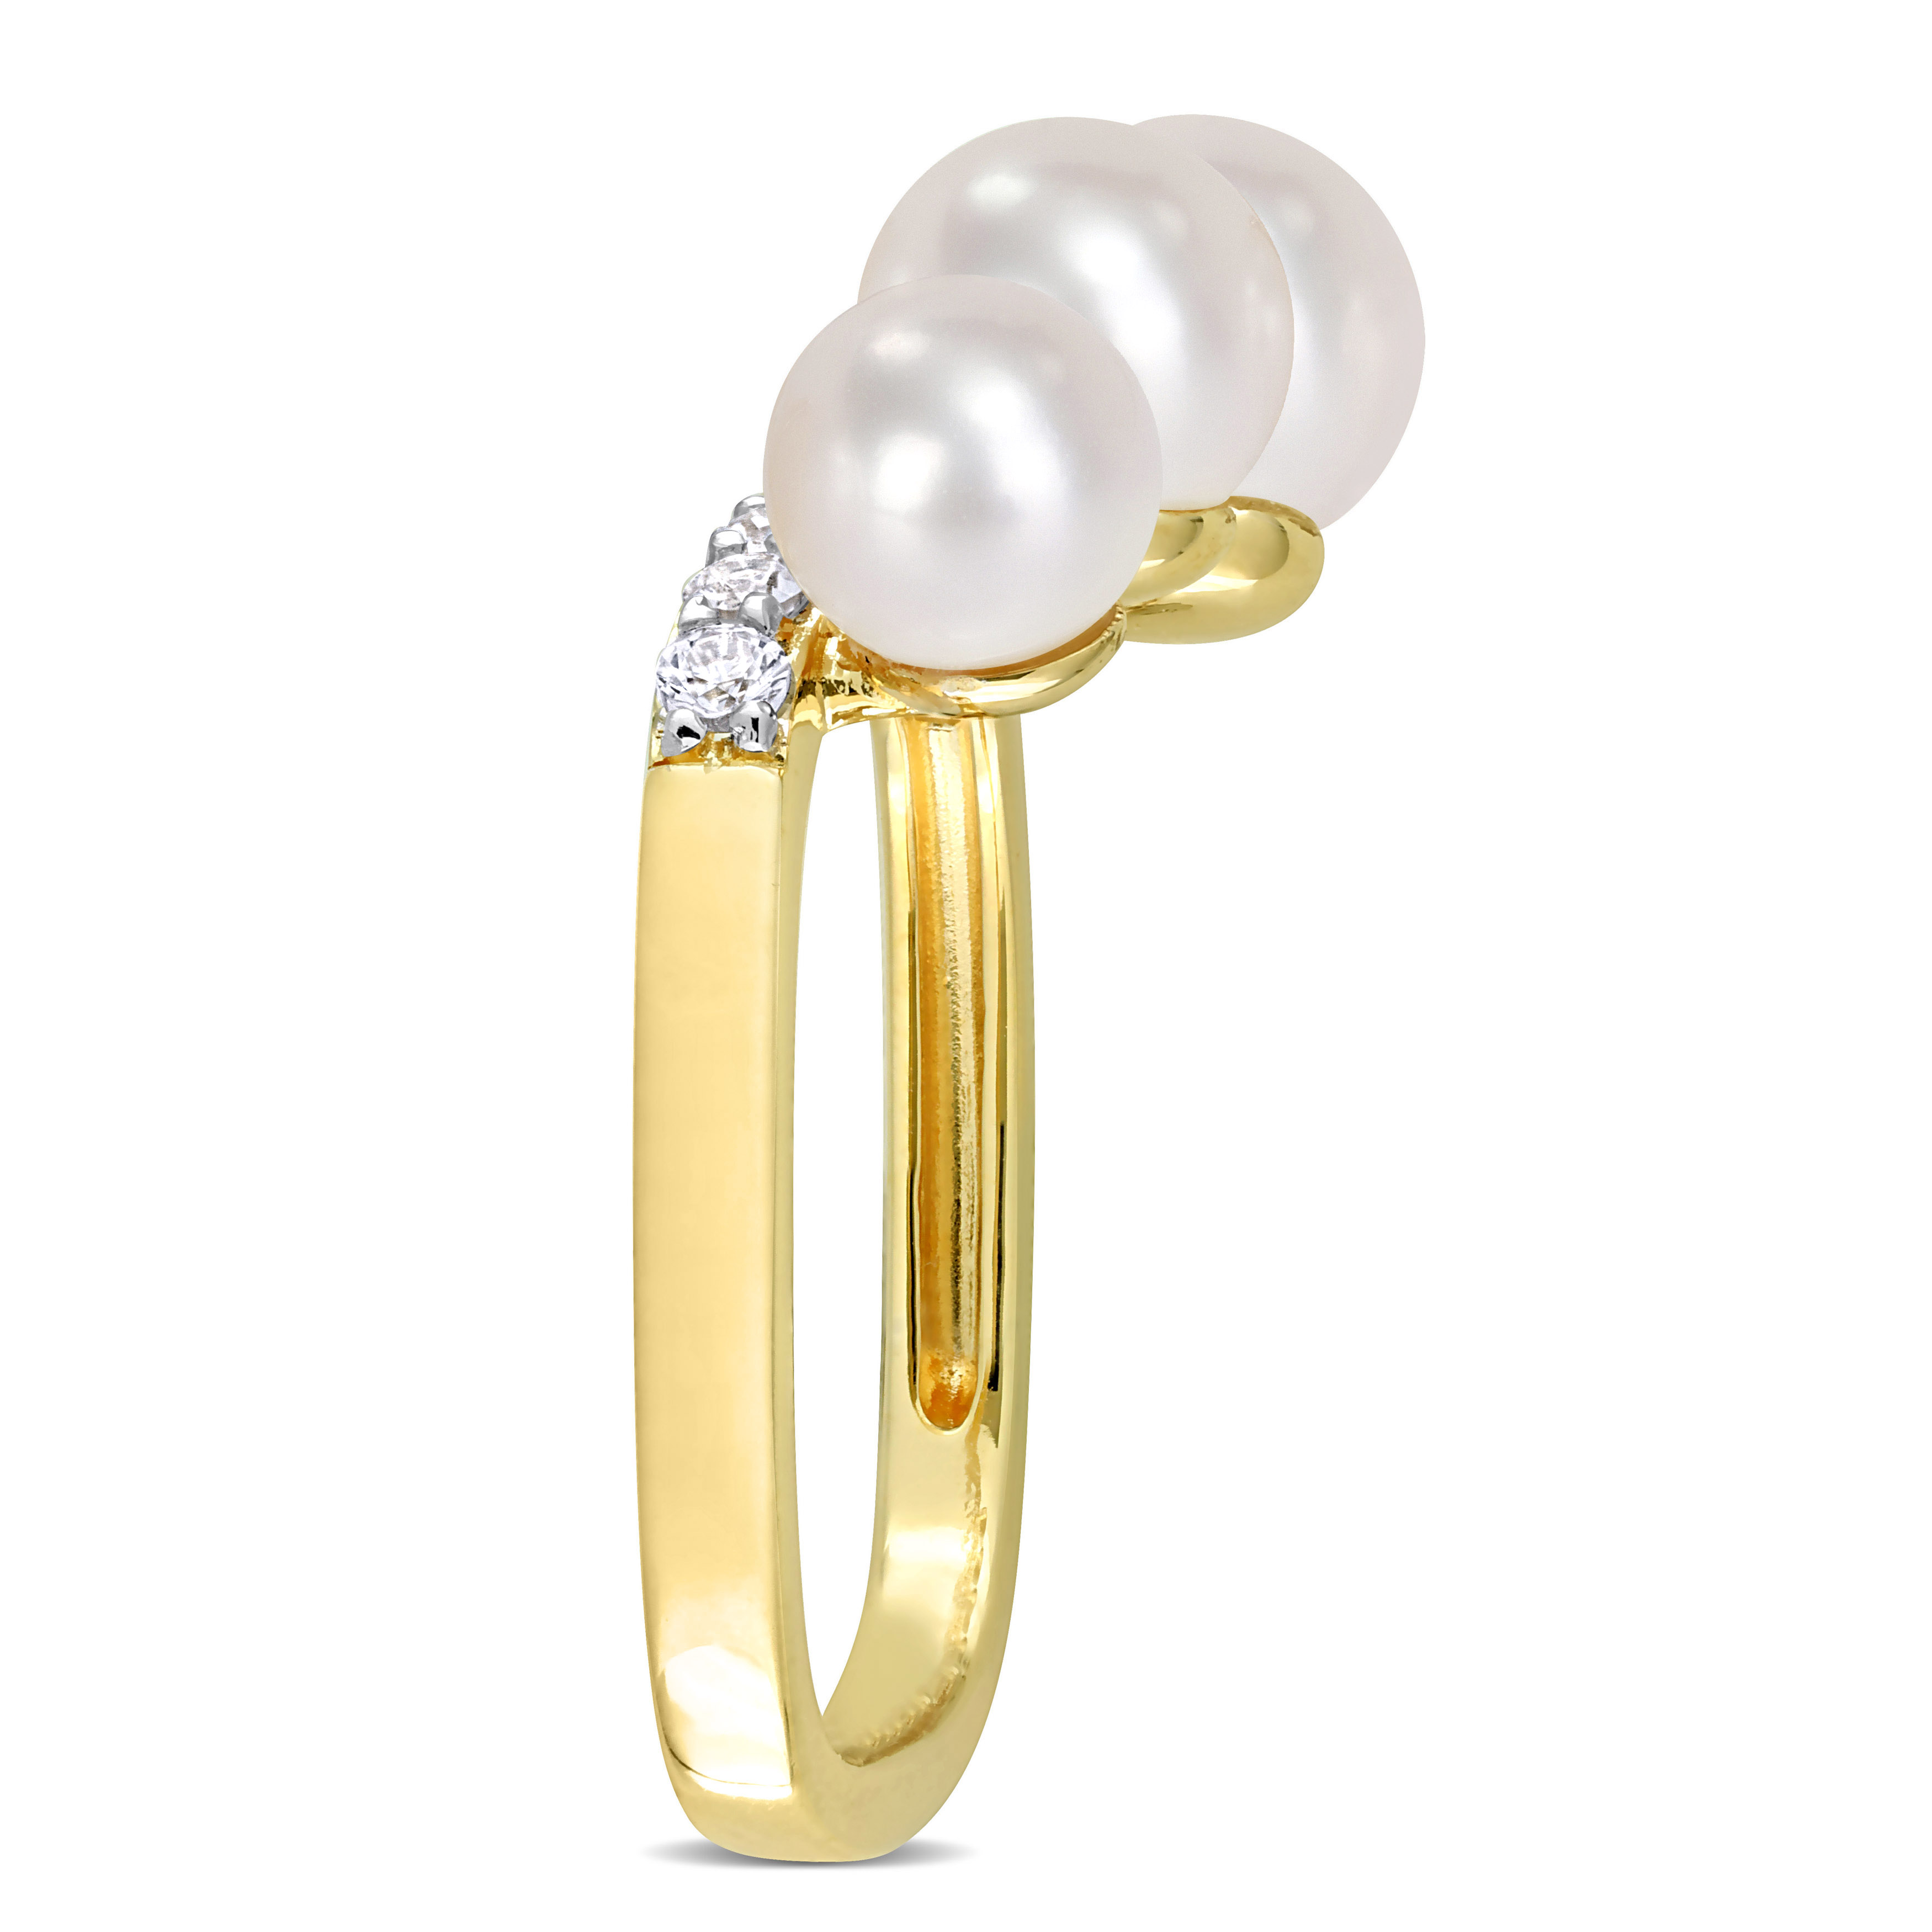 Freshwater Cultured Pearl & 3/8 CT TGW White Topaz Ring in Yellow Plated Sterling Silver